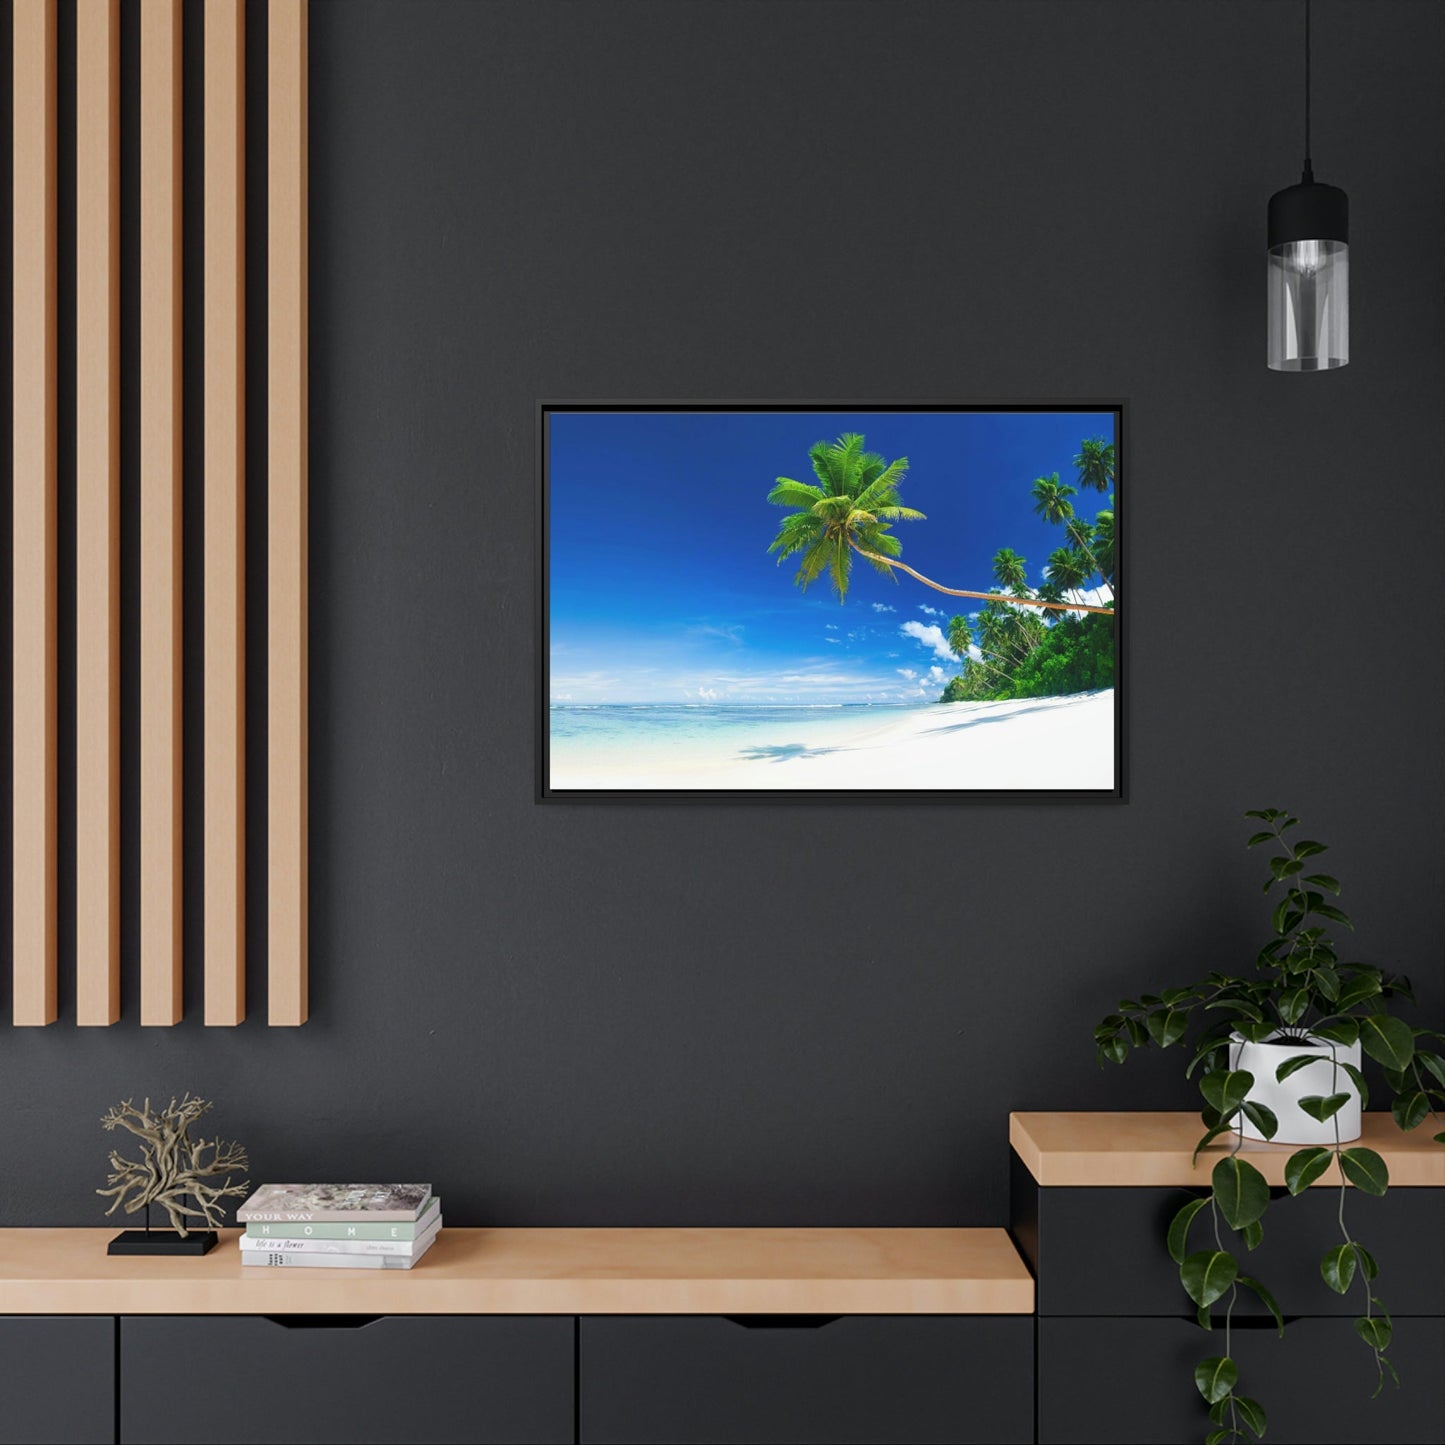 Seaside Serenity: Canvas & Poster Print of a Peaceful Beach on an Island